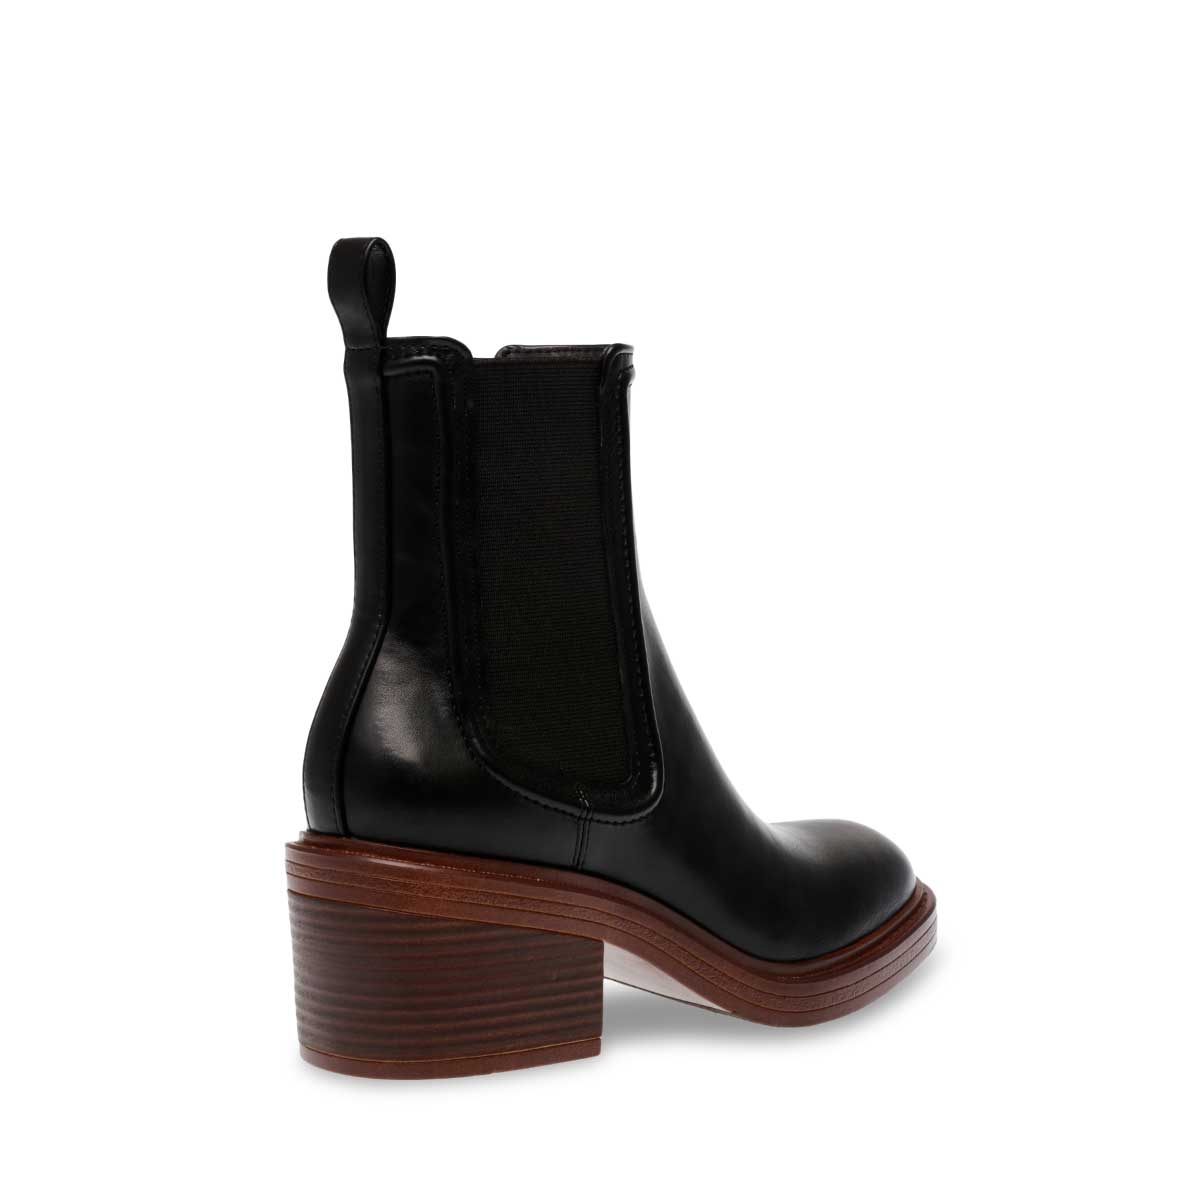 Steve Madden Curtsy Platform Chelsea Boot black leather back side | MILK MONEY milkmoney.co | cute shoes for women. ladies shoes. nice shoes for women. ladies shoes online. ladies footwear. womens shoes and boots. pretty shoes for women. beautiful shoes for women.